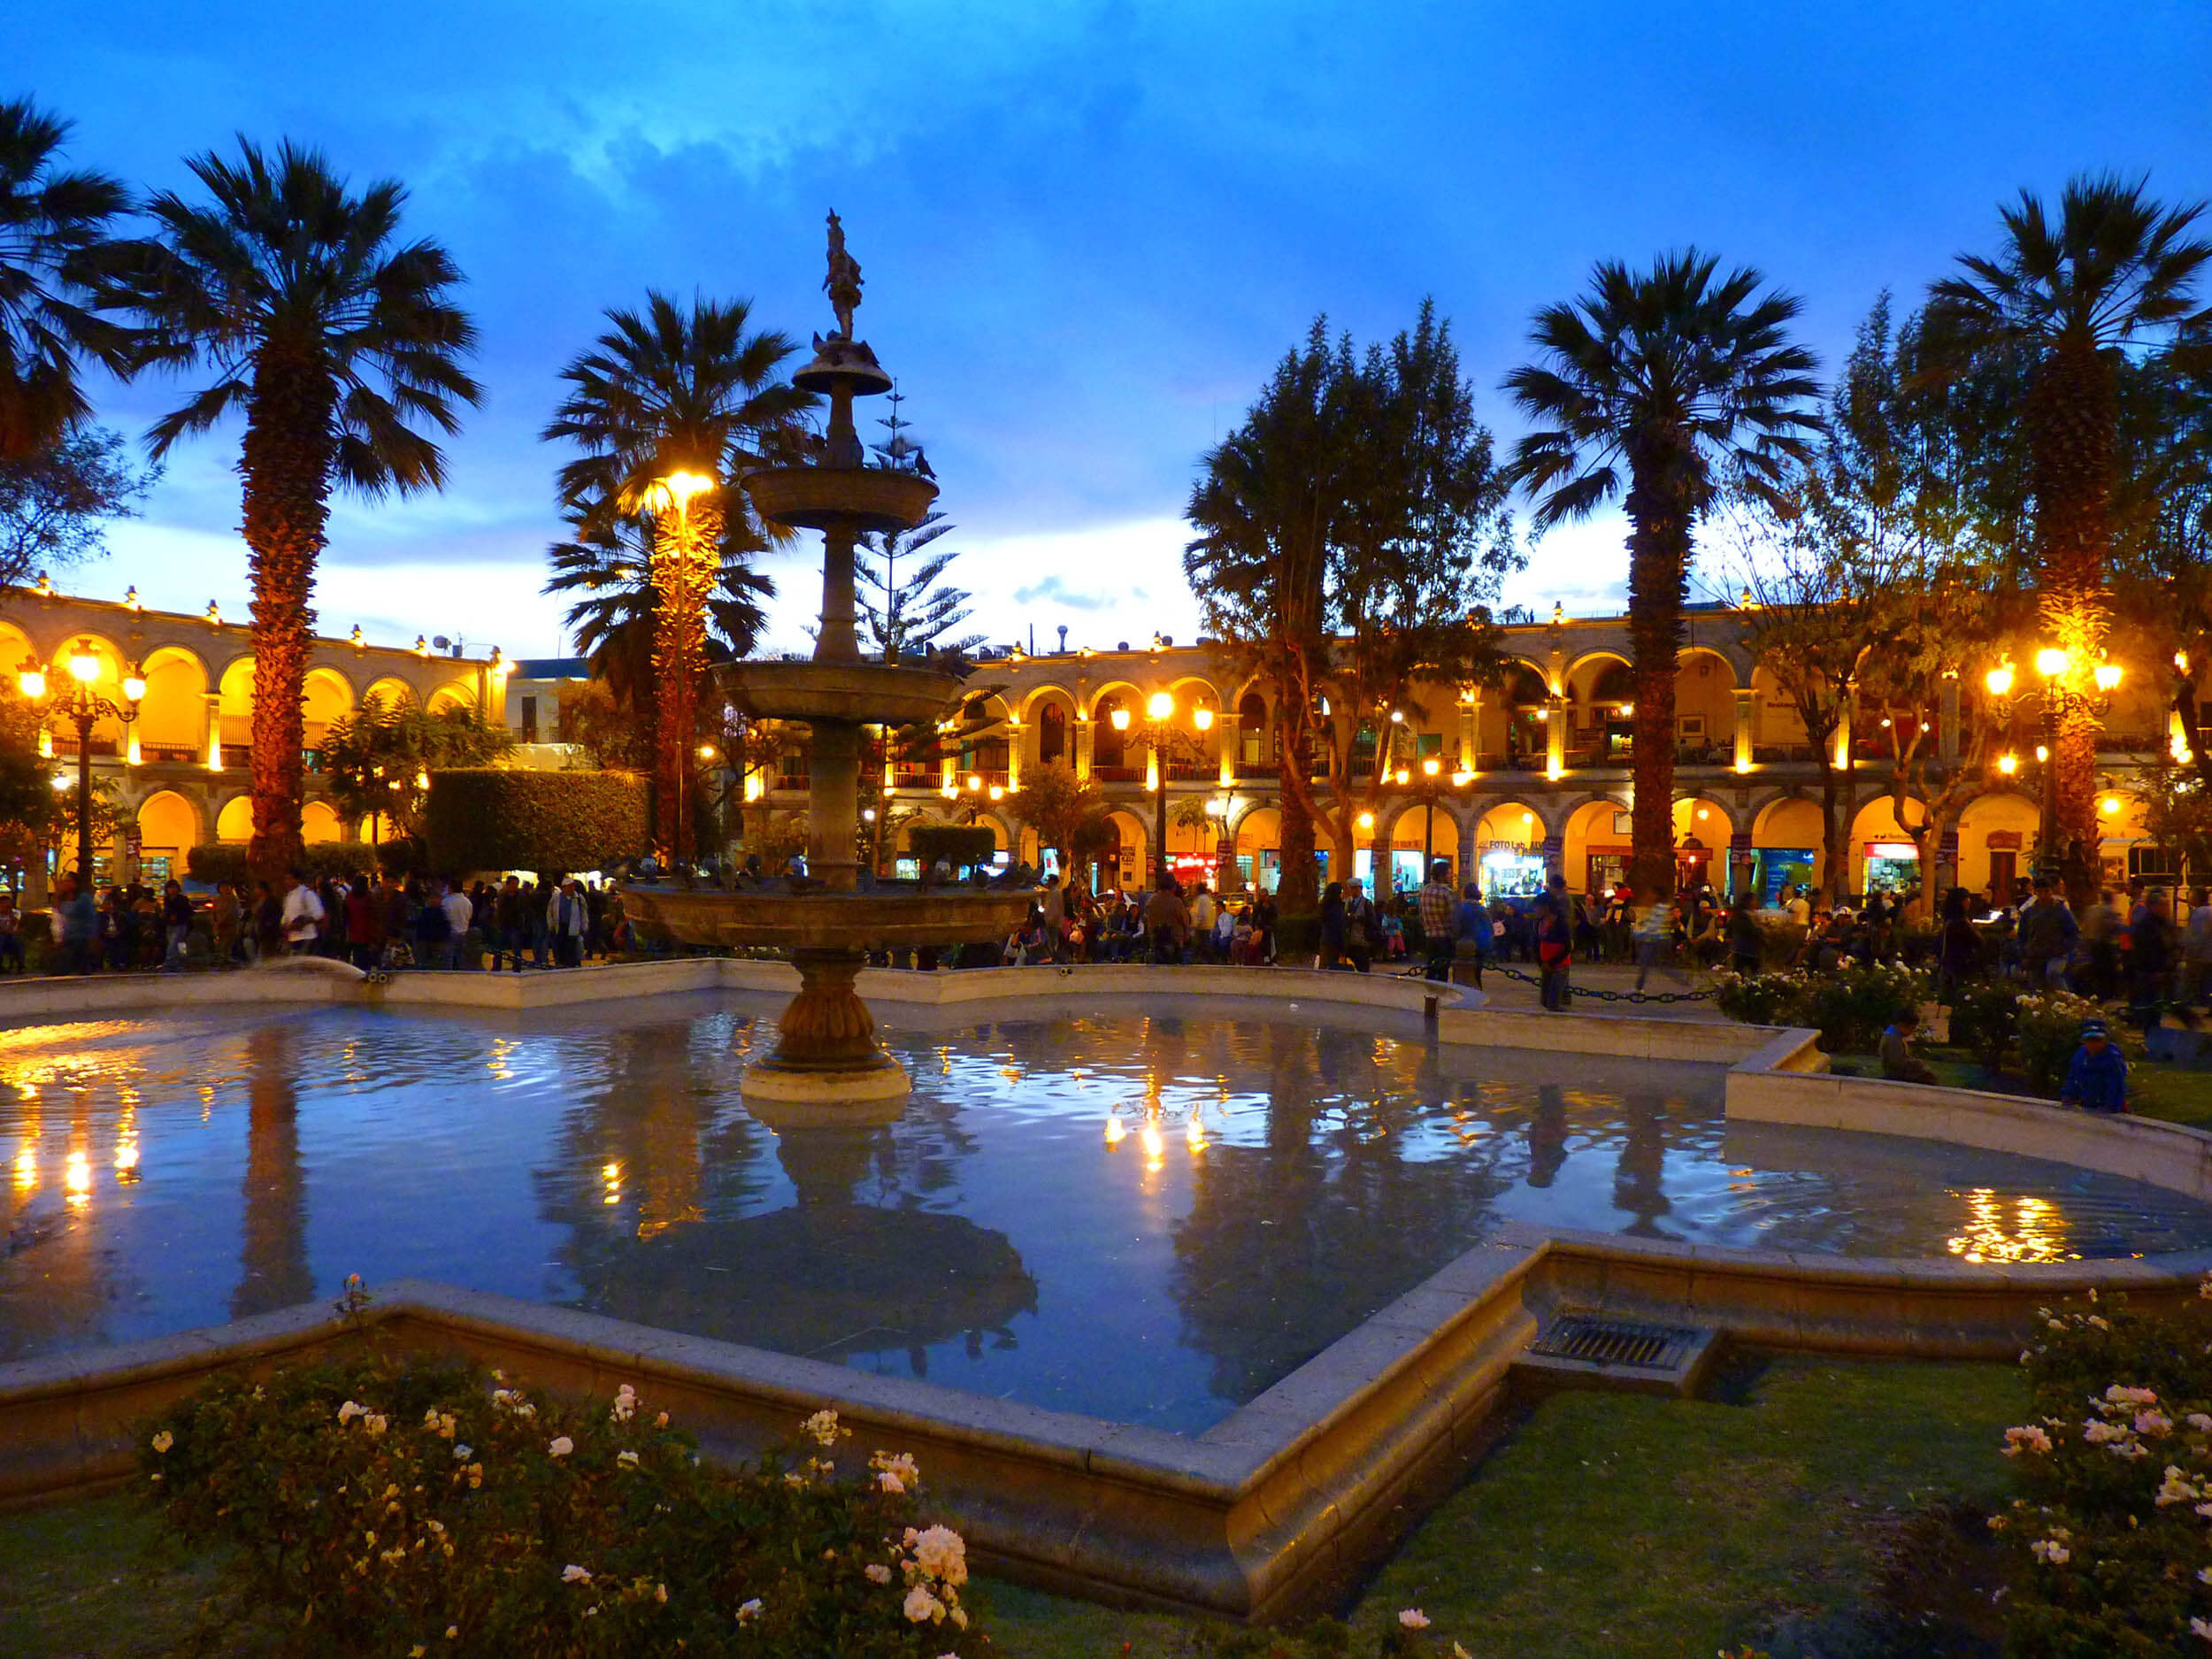 The Main Square of Arequipa is just two blocks away